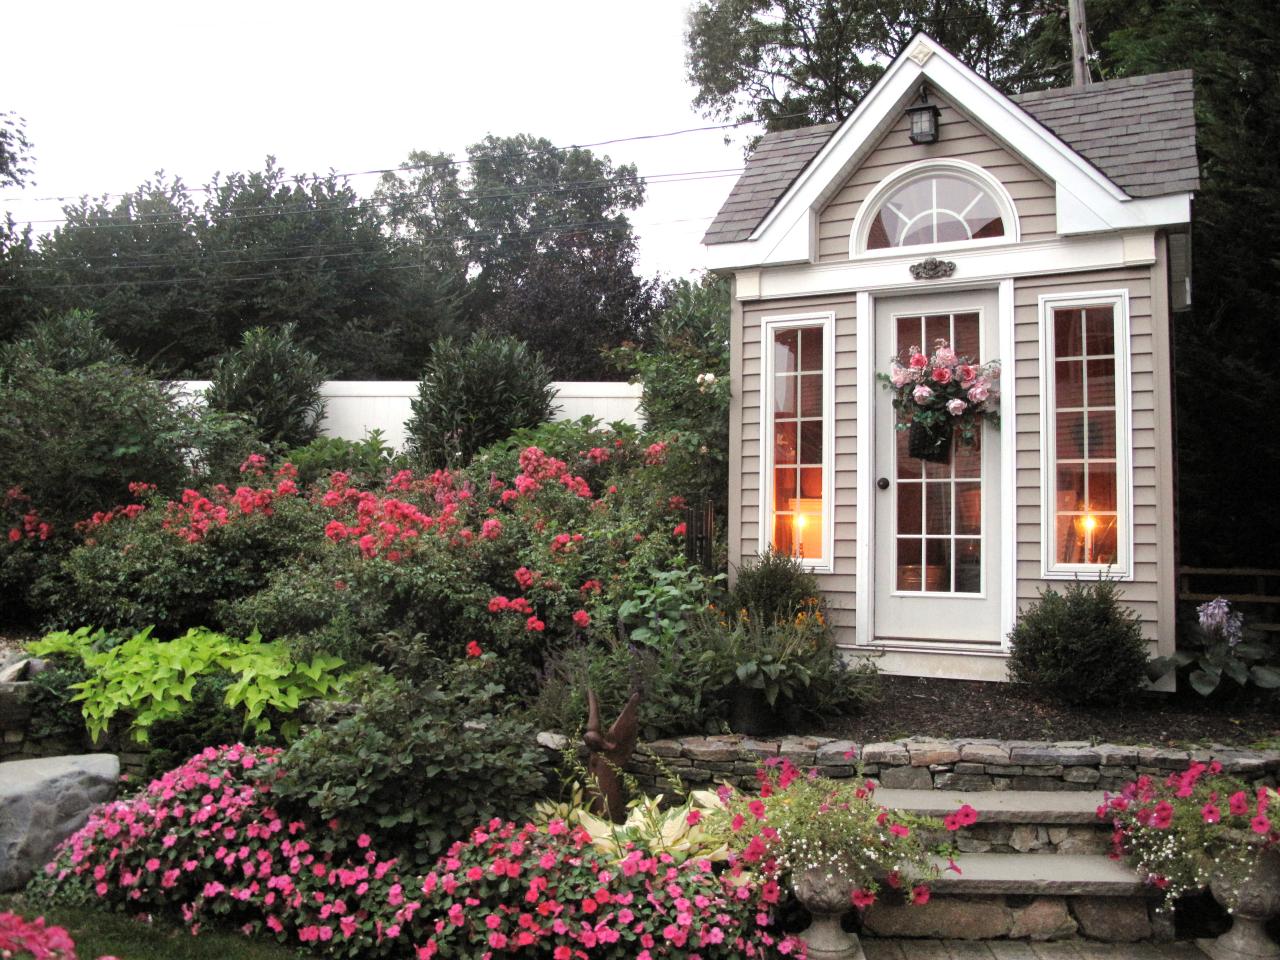 Garden Sheds: They\u002639;ve Never Looked So Good  Landscaping Ideas and Hardscape Design  HGTV